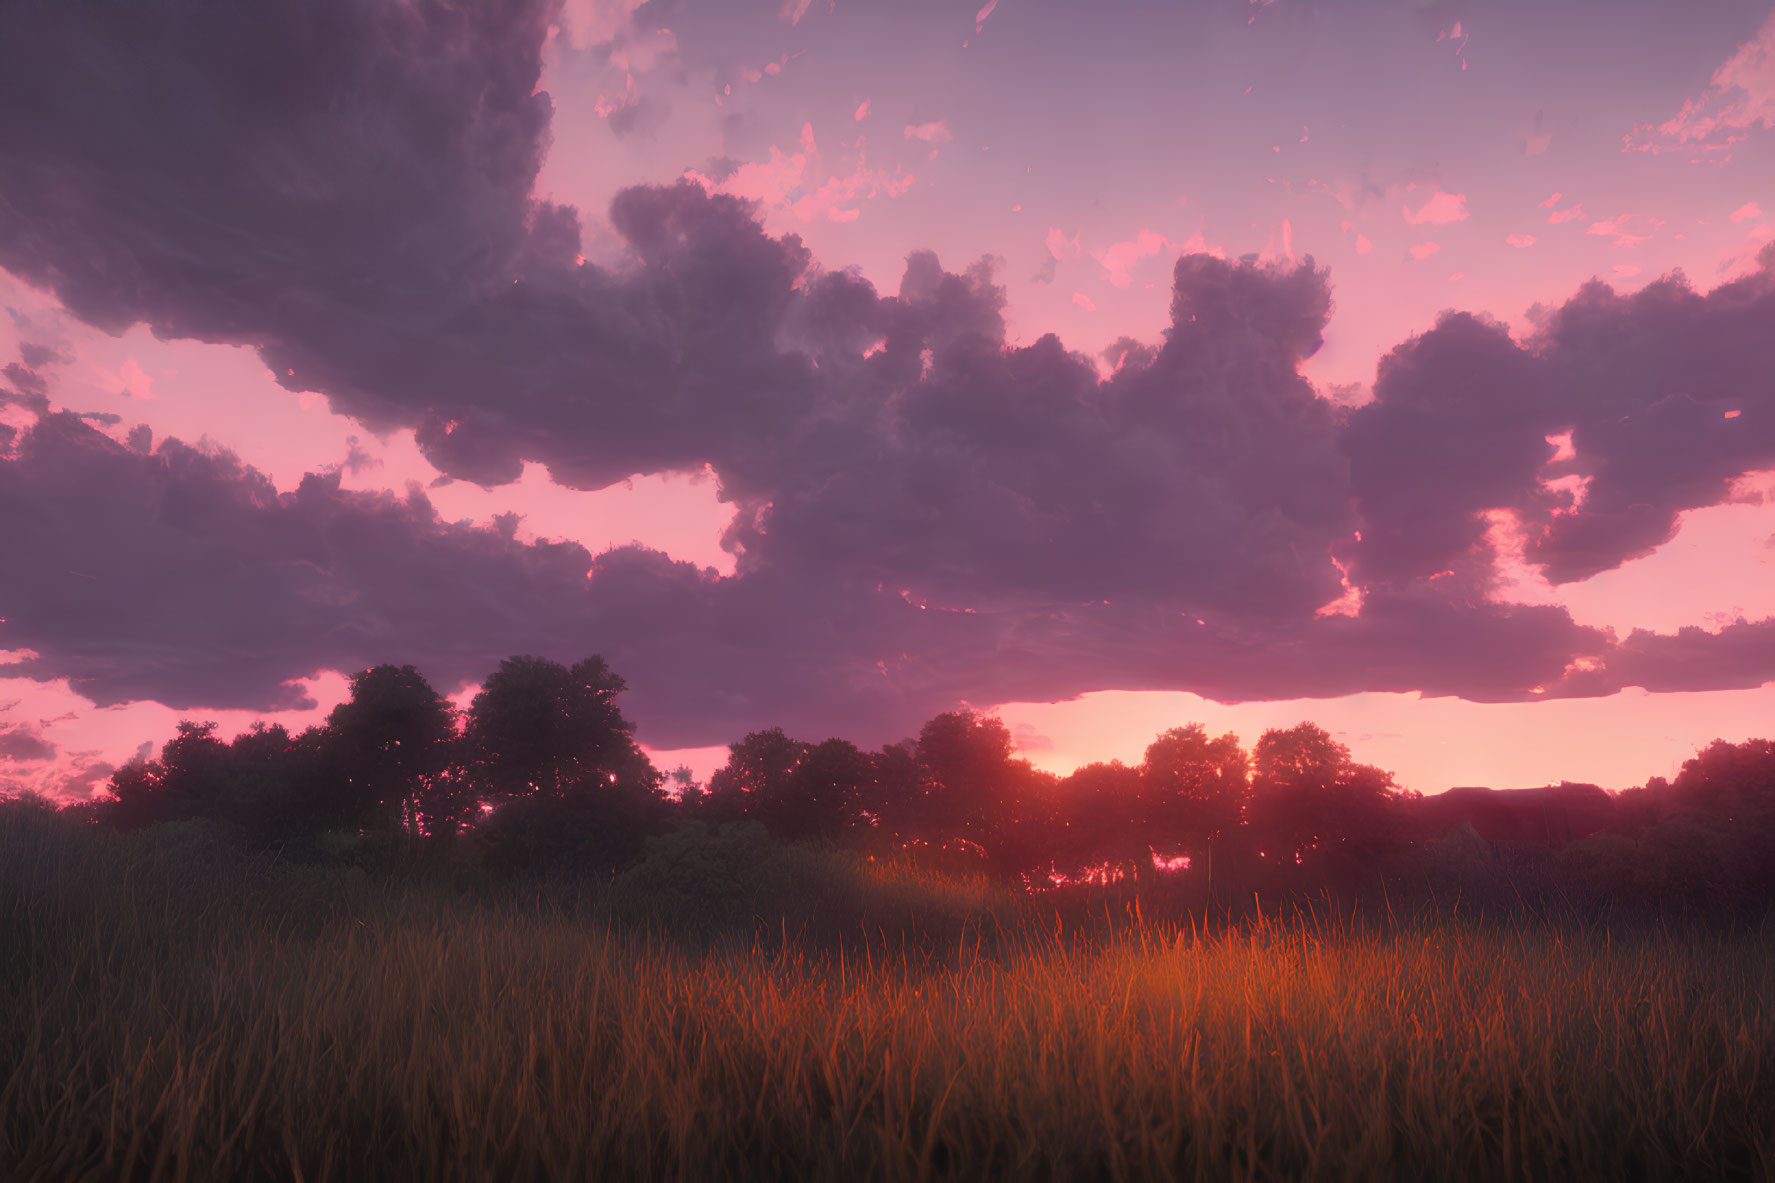 Vibrant pink and purple sunset over golden field and silhouetted trees